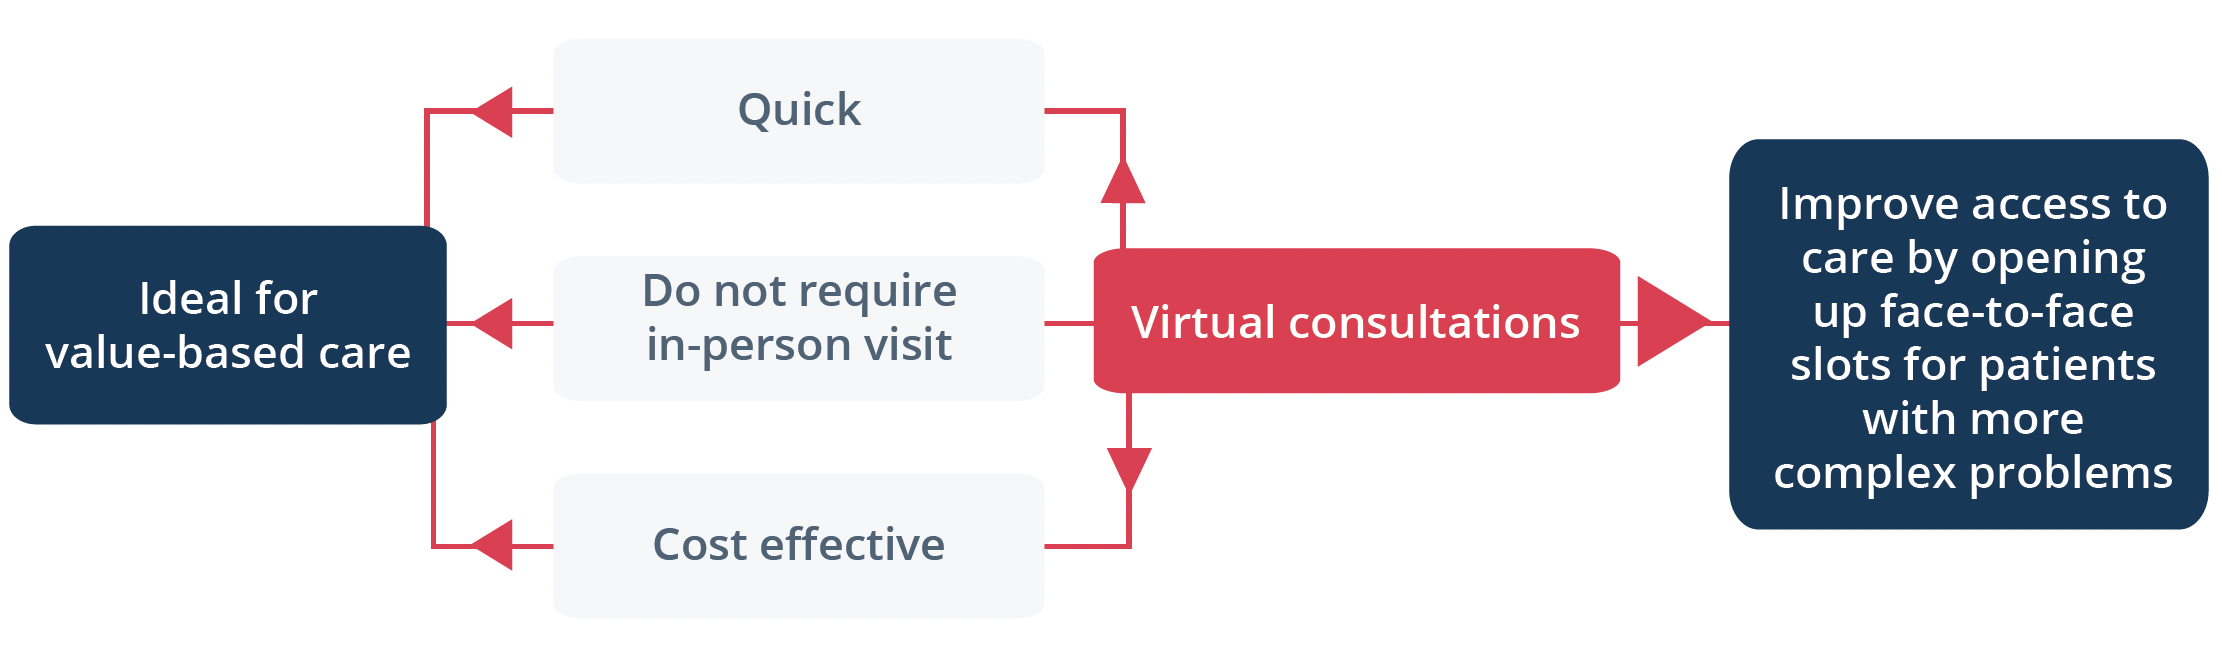 Benefits of virtual consultations, including patient engagement